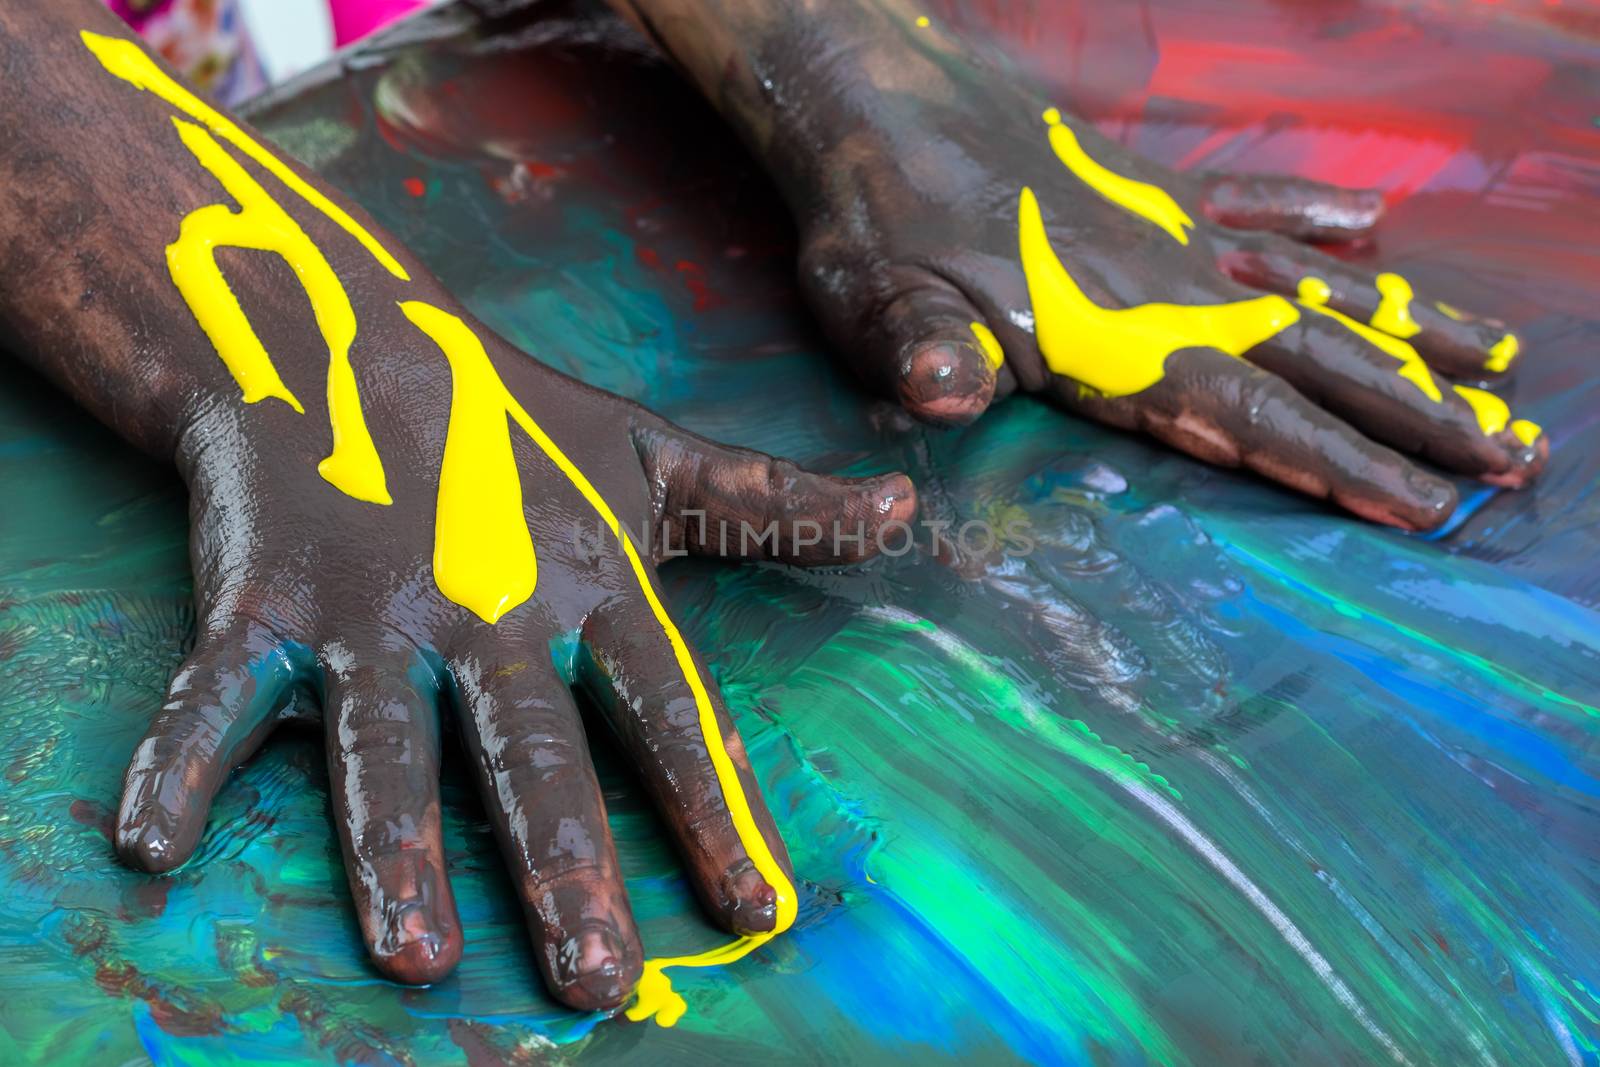 Close up of child’s hands painting at table.Colorful mosaic with paint covered hands.